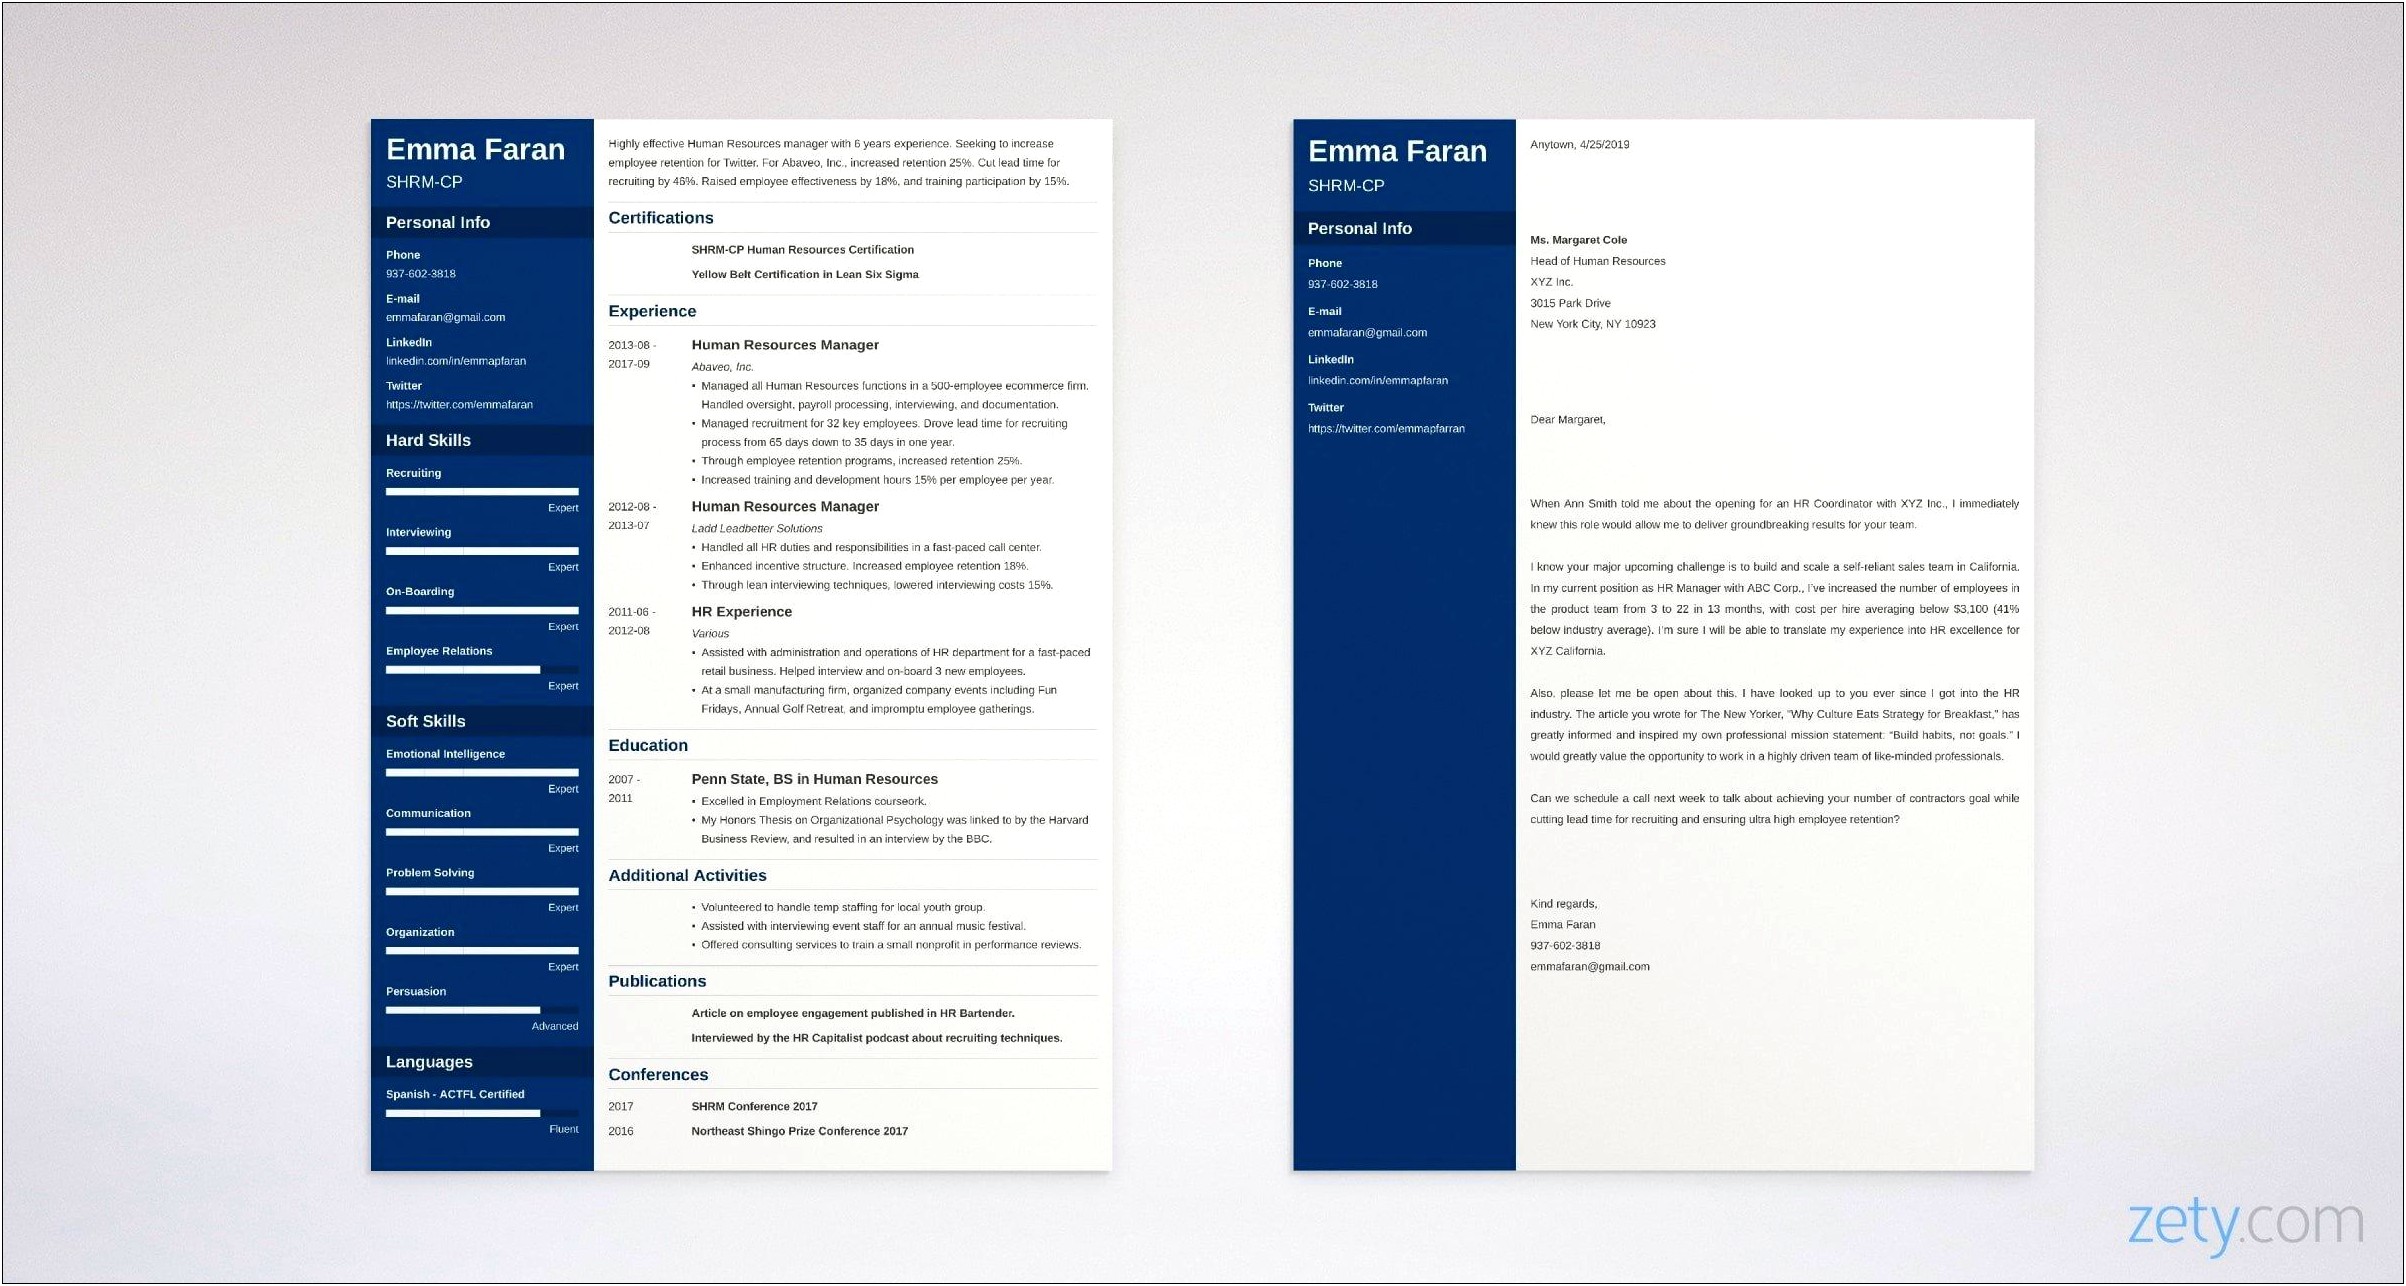 Human Resource Director Resume Cover Letter